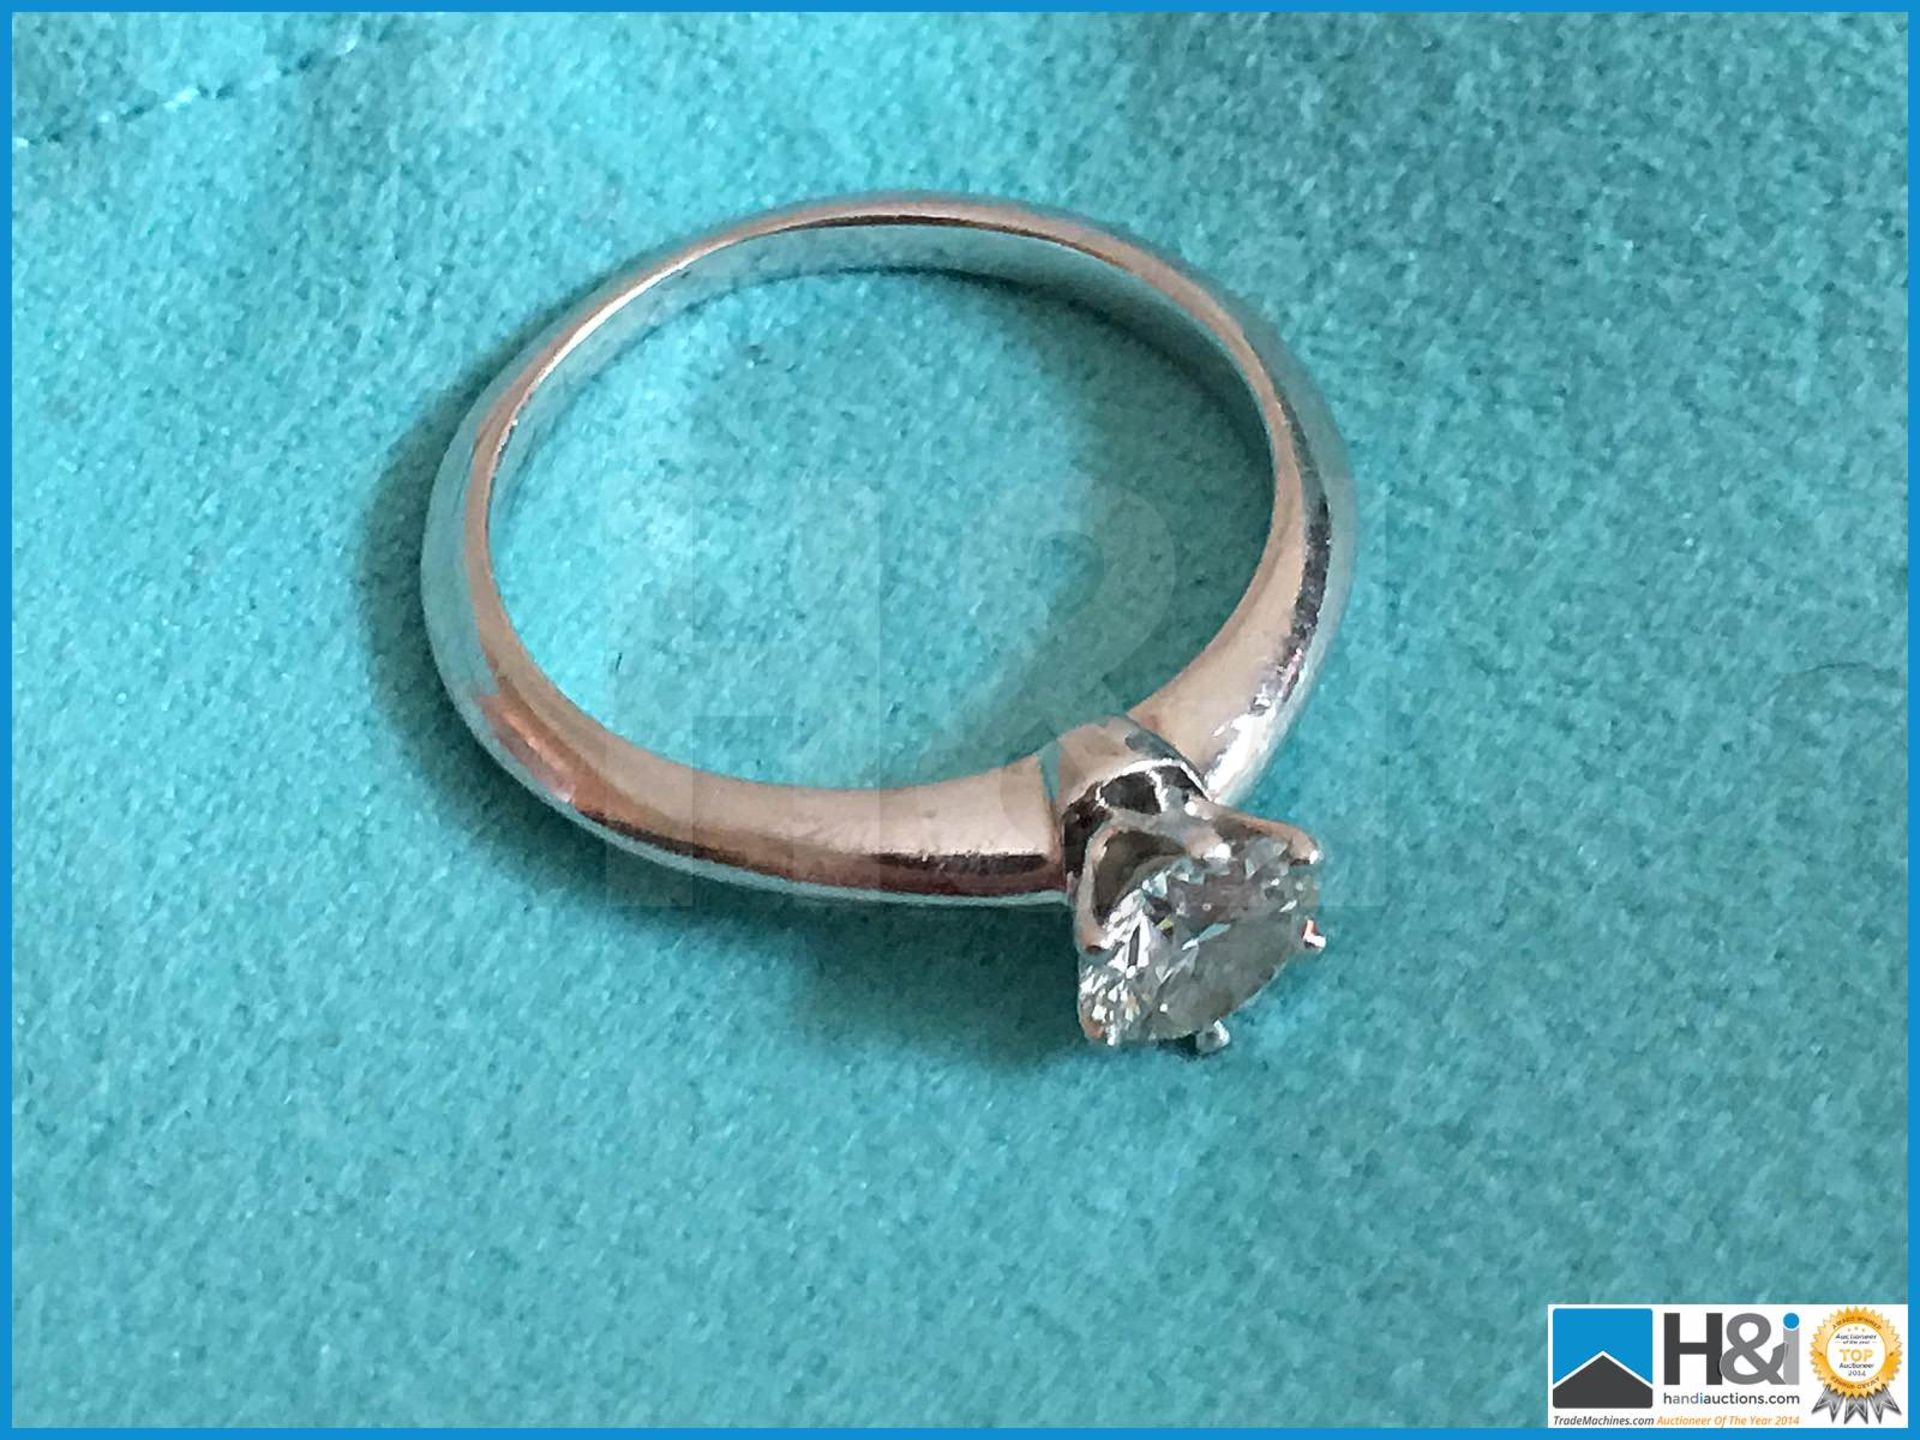 Genuine Tiffany classic iconic engagement ring in Platinum with 0.75 Carat Diamond purchased from Ti - Image 6 of 8